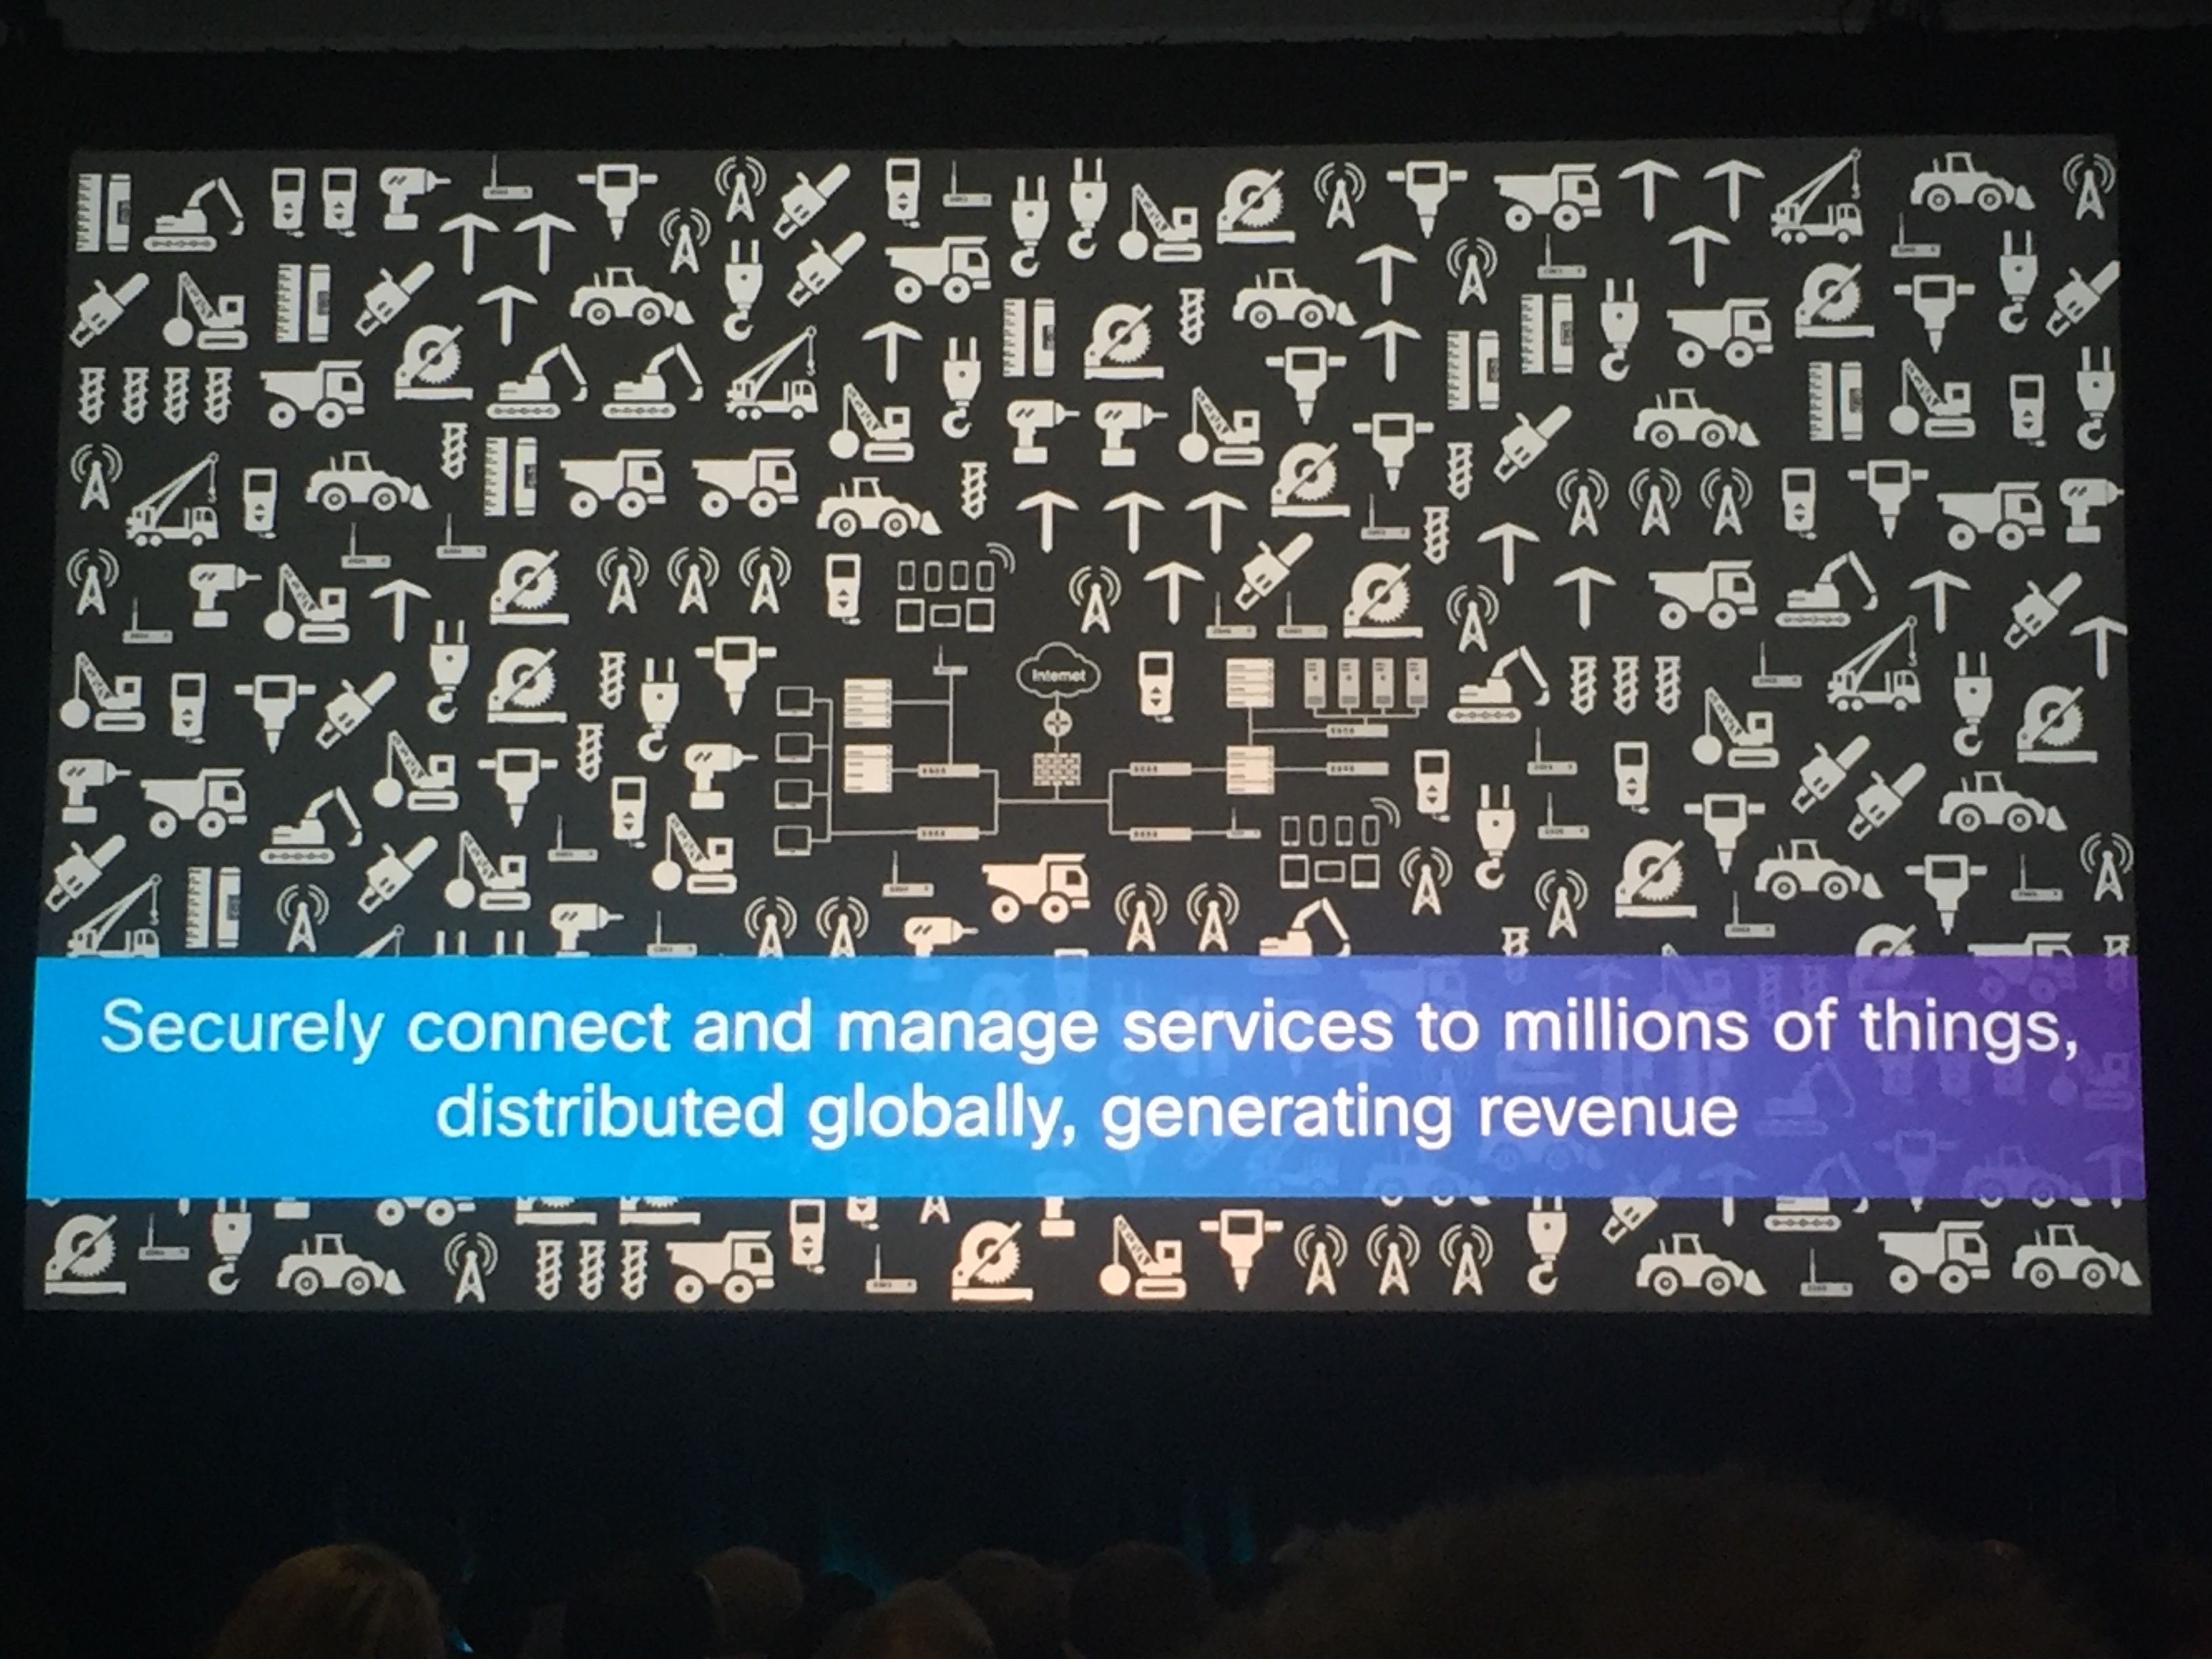 Cisco's take on the Internet of Things